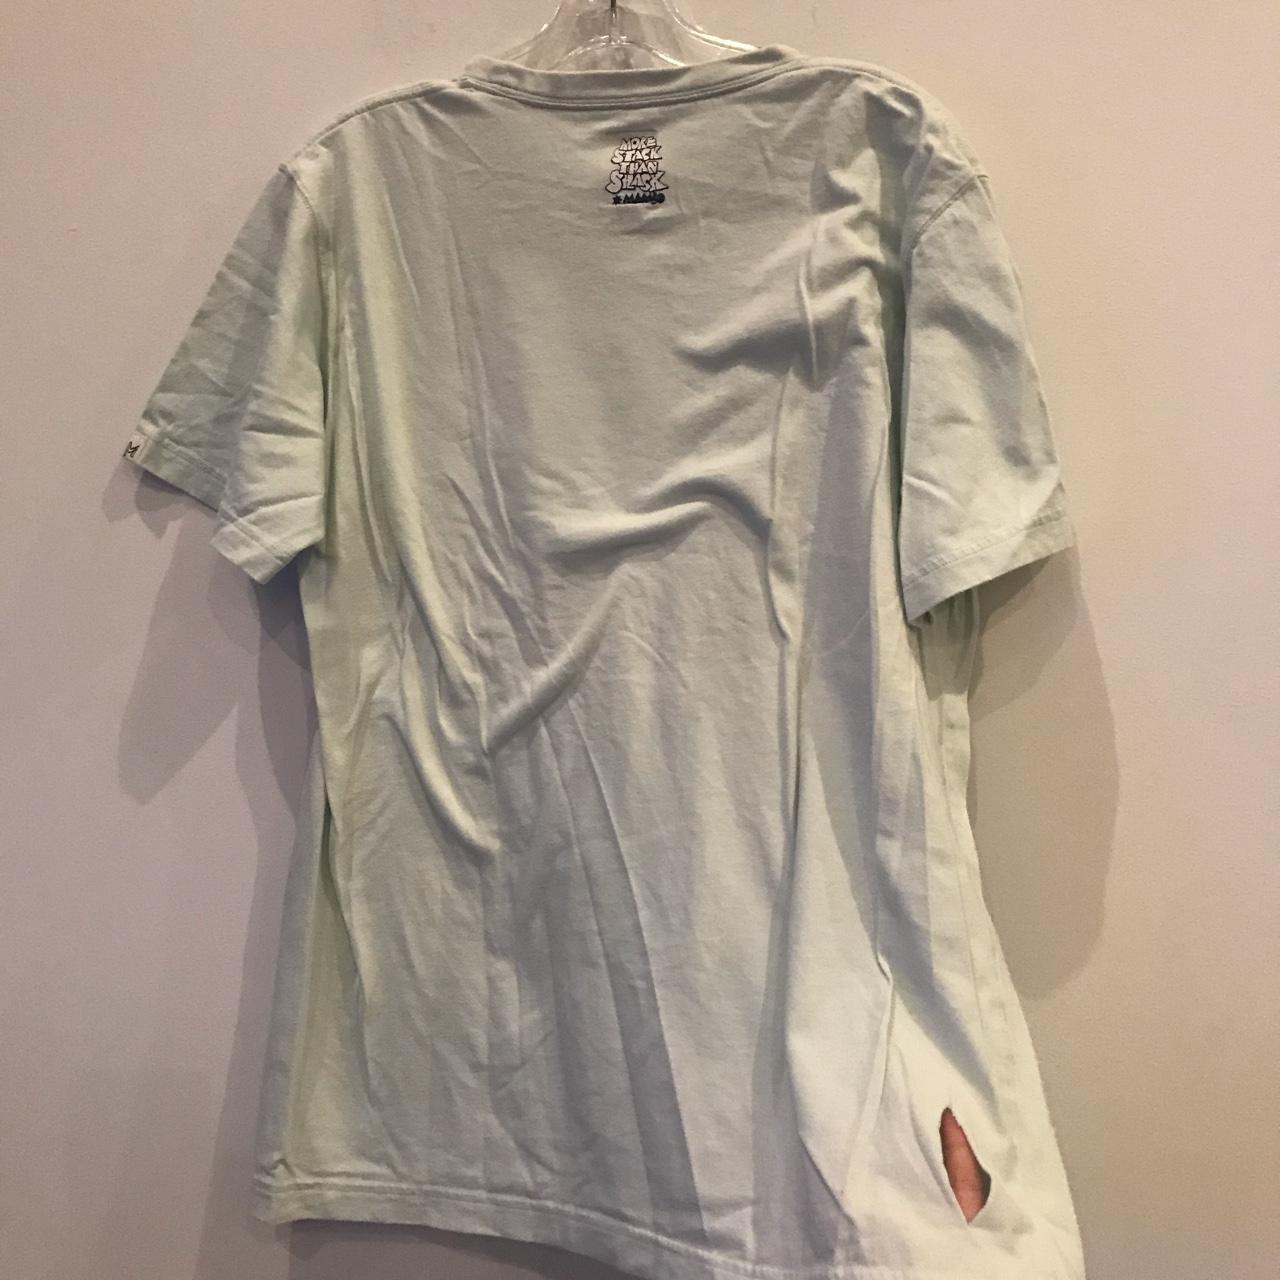 Product Image 4 - GRAPHIC TEE

-great condition, barely worn
-has